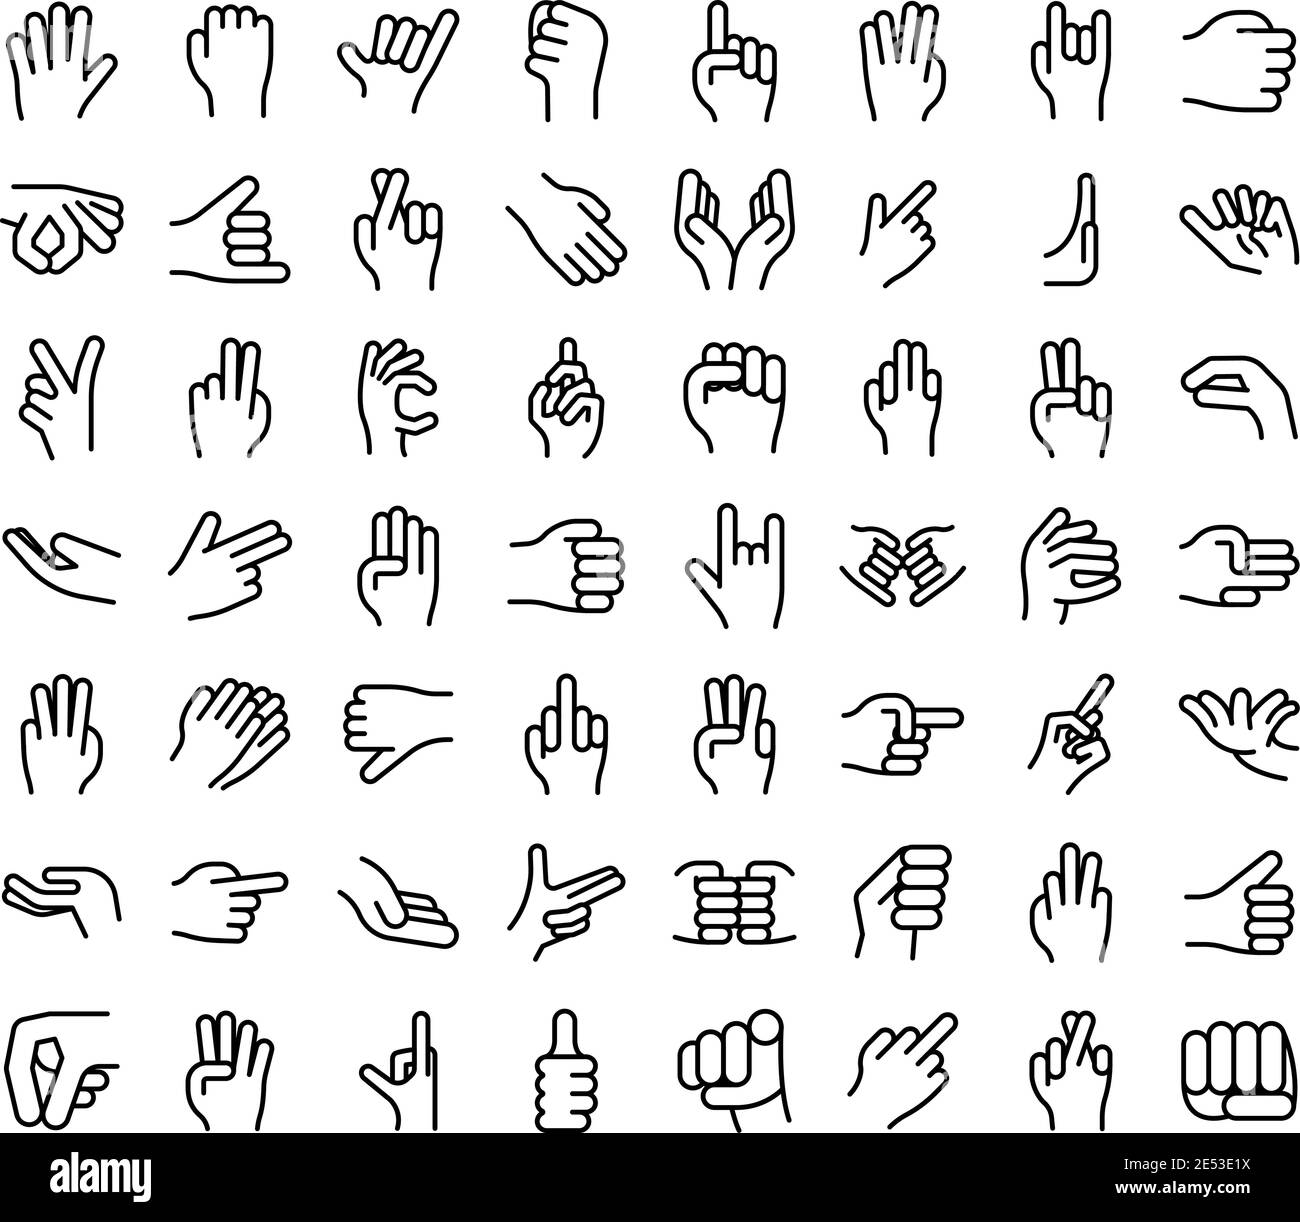 Hand Gestures Icons Set Outline Set Of Hand Gestures Vector Icons For